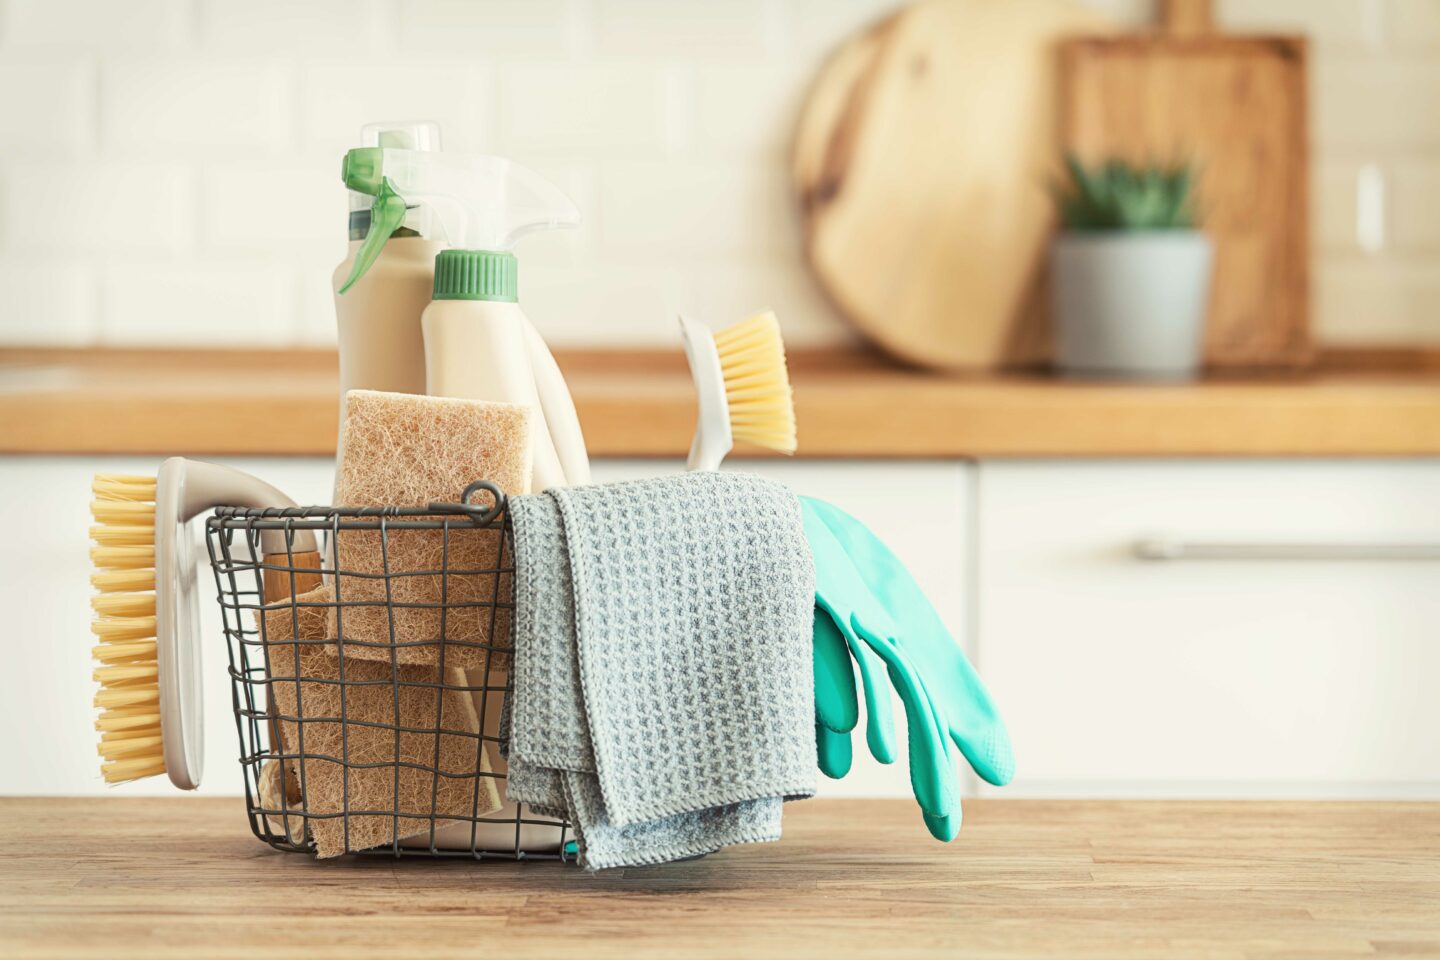 Top tips for a productive spring clean